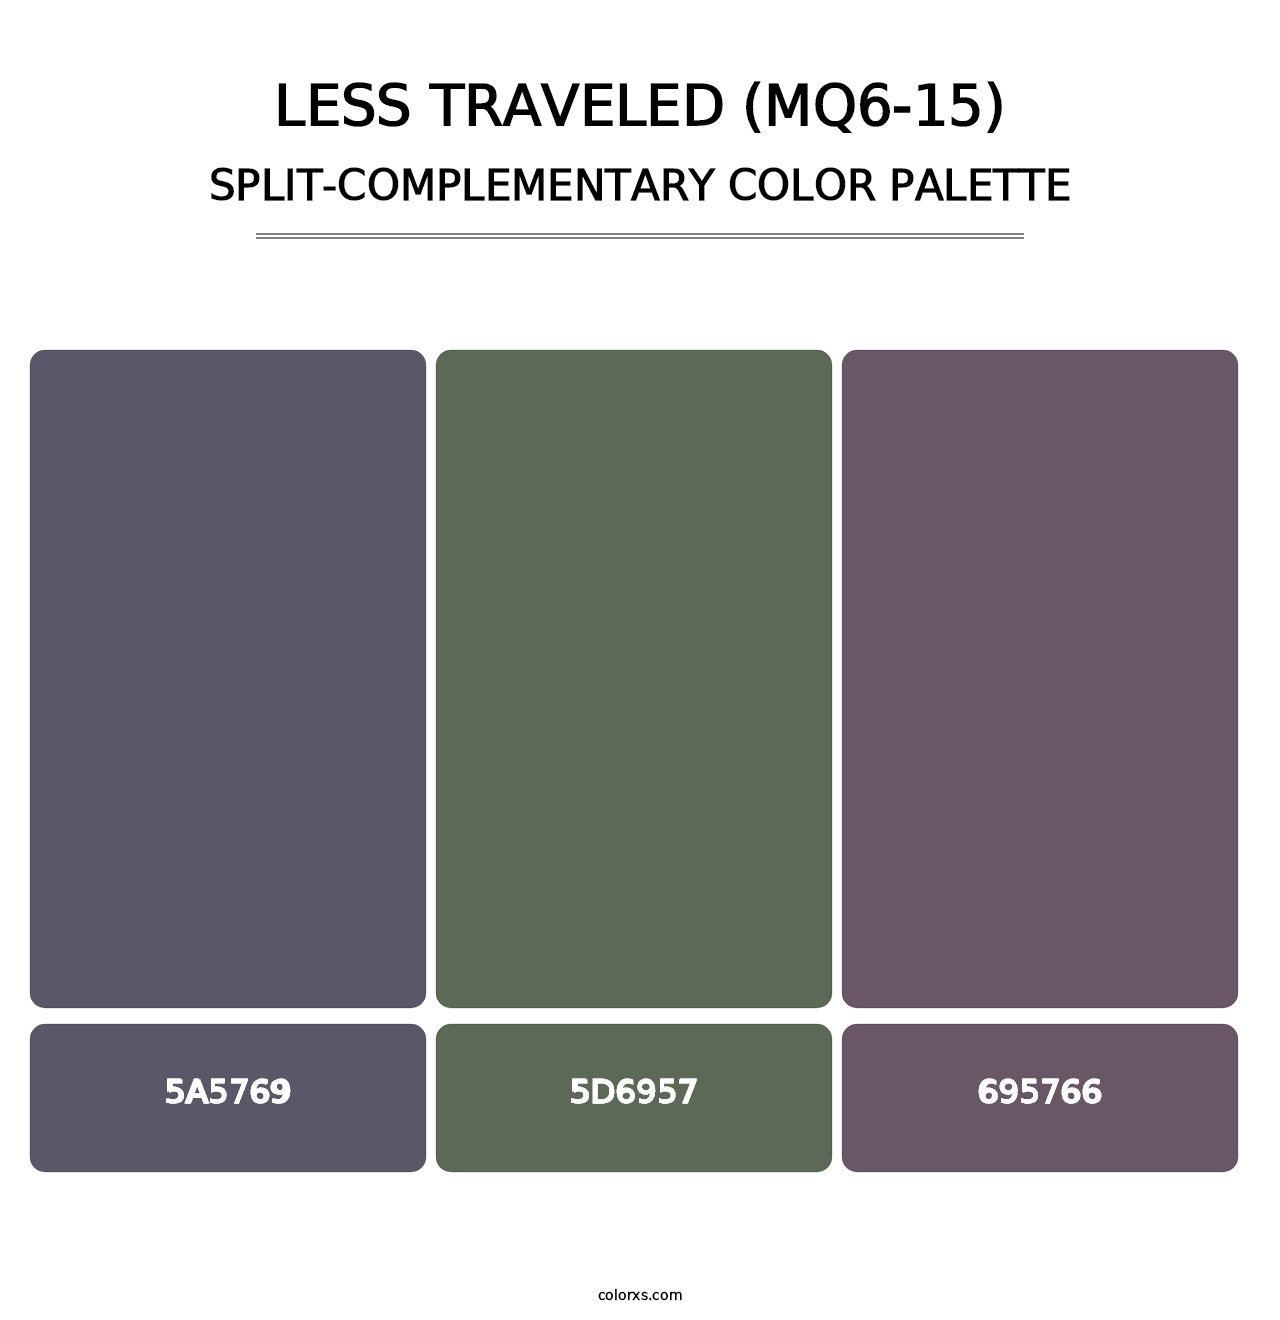 Less Traveled (MQ6-15) - Split-Complementary Color Palette